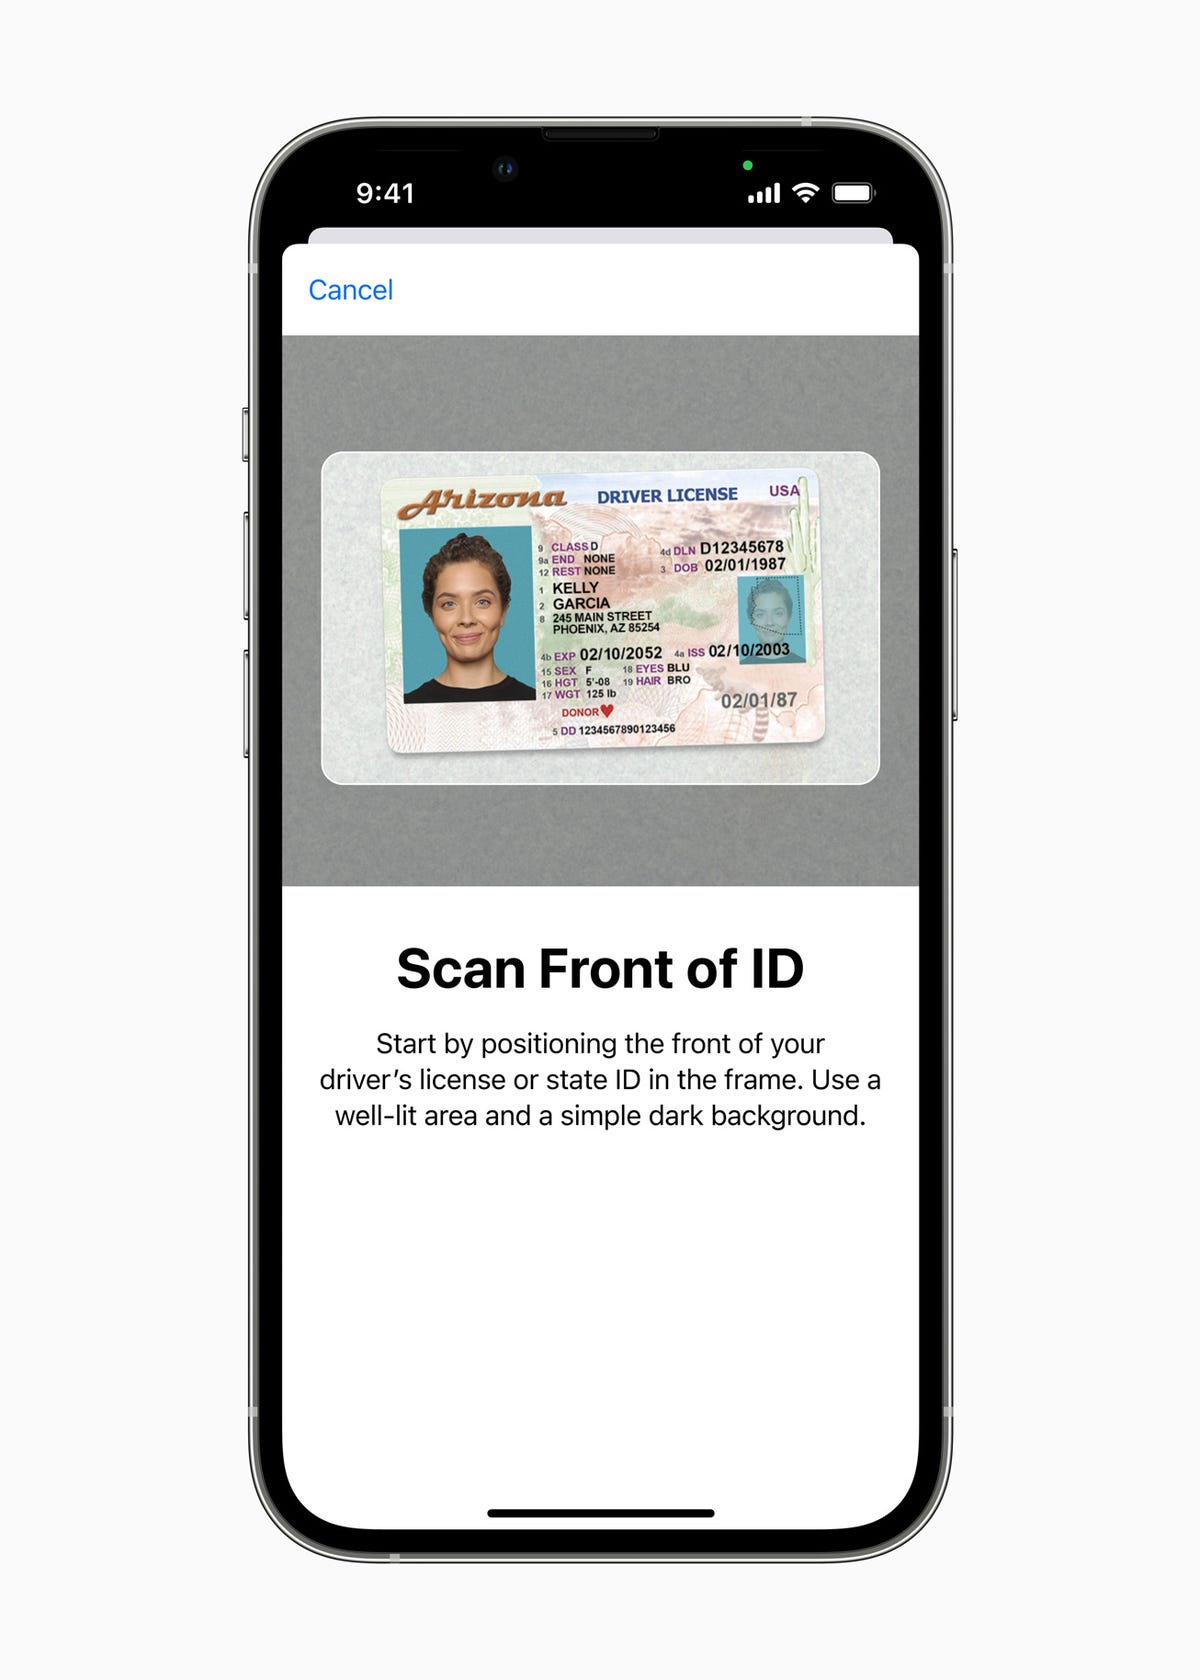 apple-state-id-availability-update-scan-front.jpg